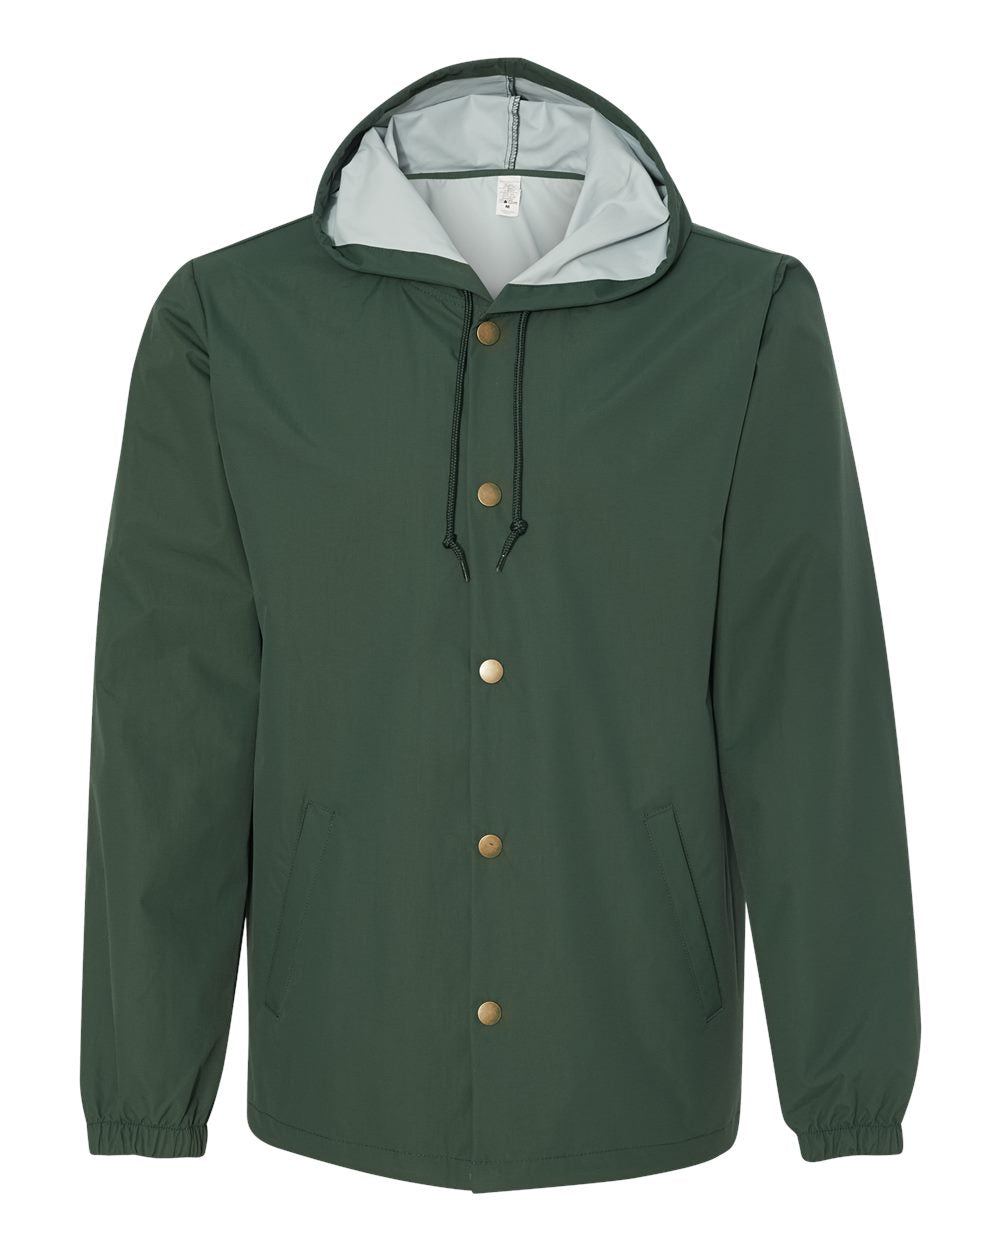 Independent Trading Co. - Water-Resistant Hooded Windbreaker